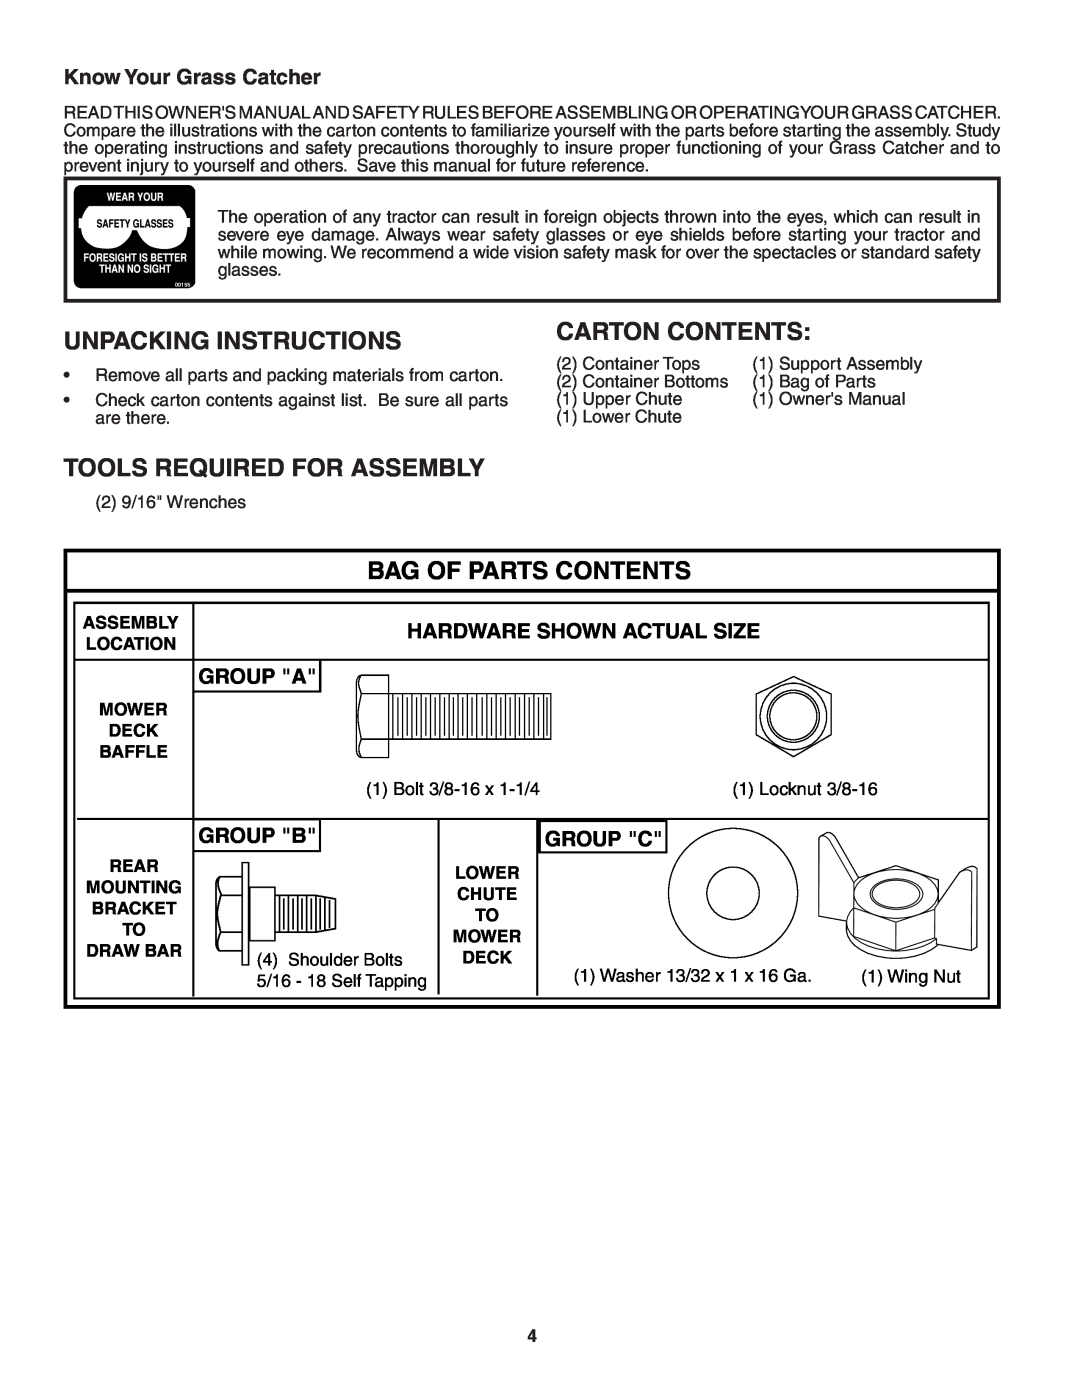 Poulan 954 14 01-10 Unpacking Instructions, Carton Contents, Tools Required For Assembly, Bag Of Parts Contents, Group A 